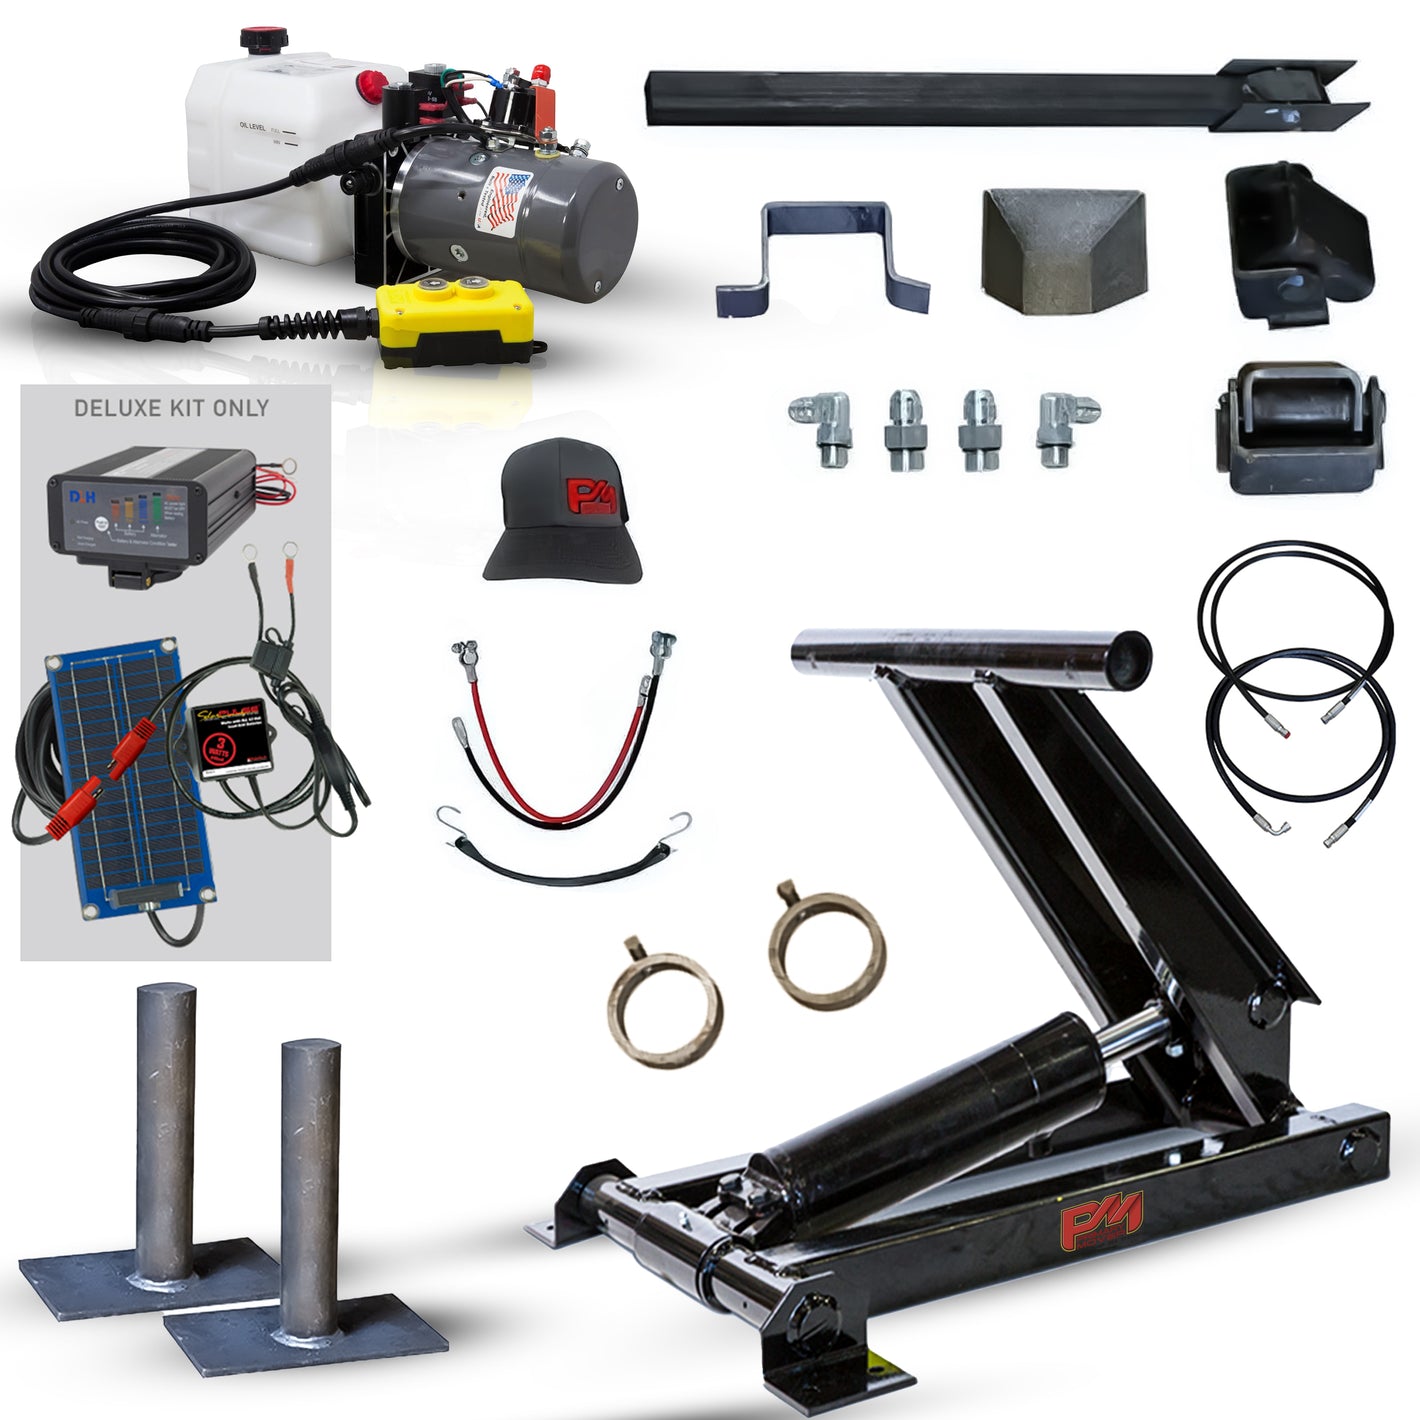 Truck and trailer hydraulic scissor hoist black with hardware and power unit white background. 